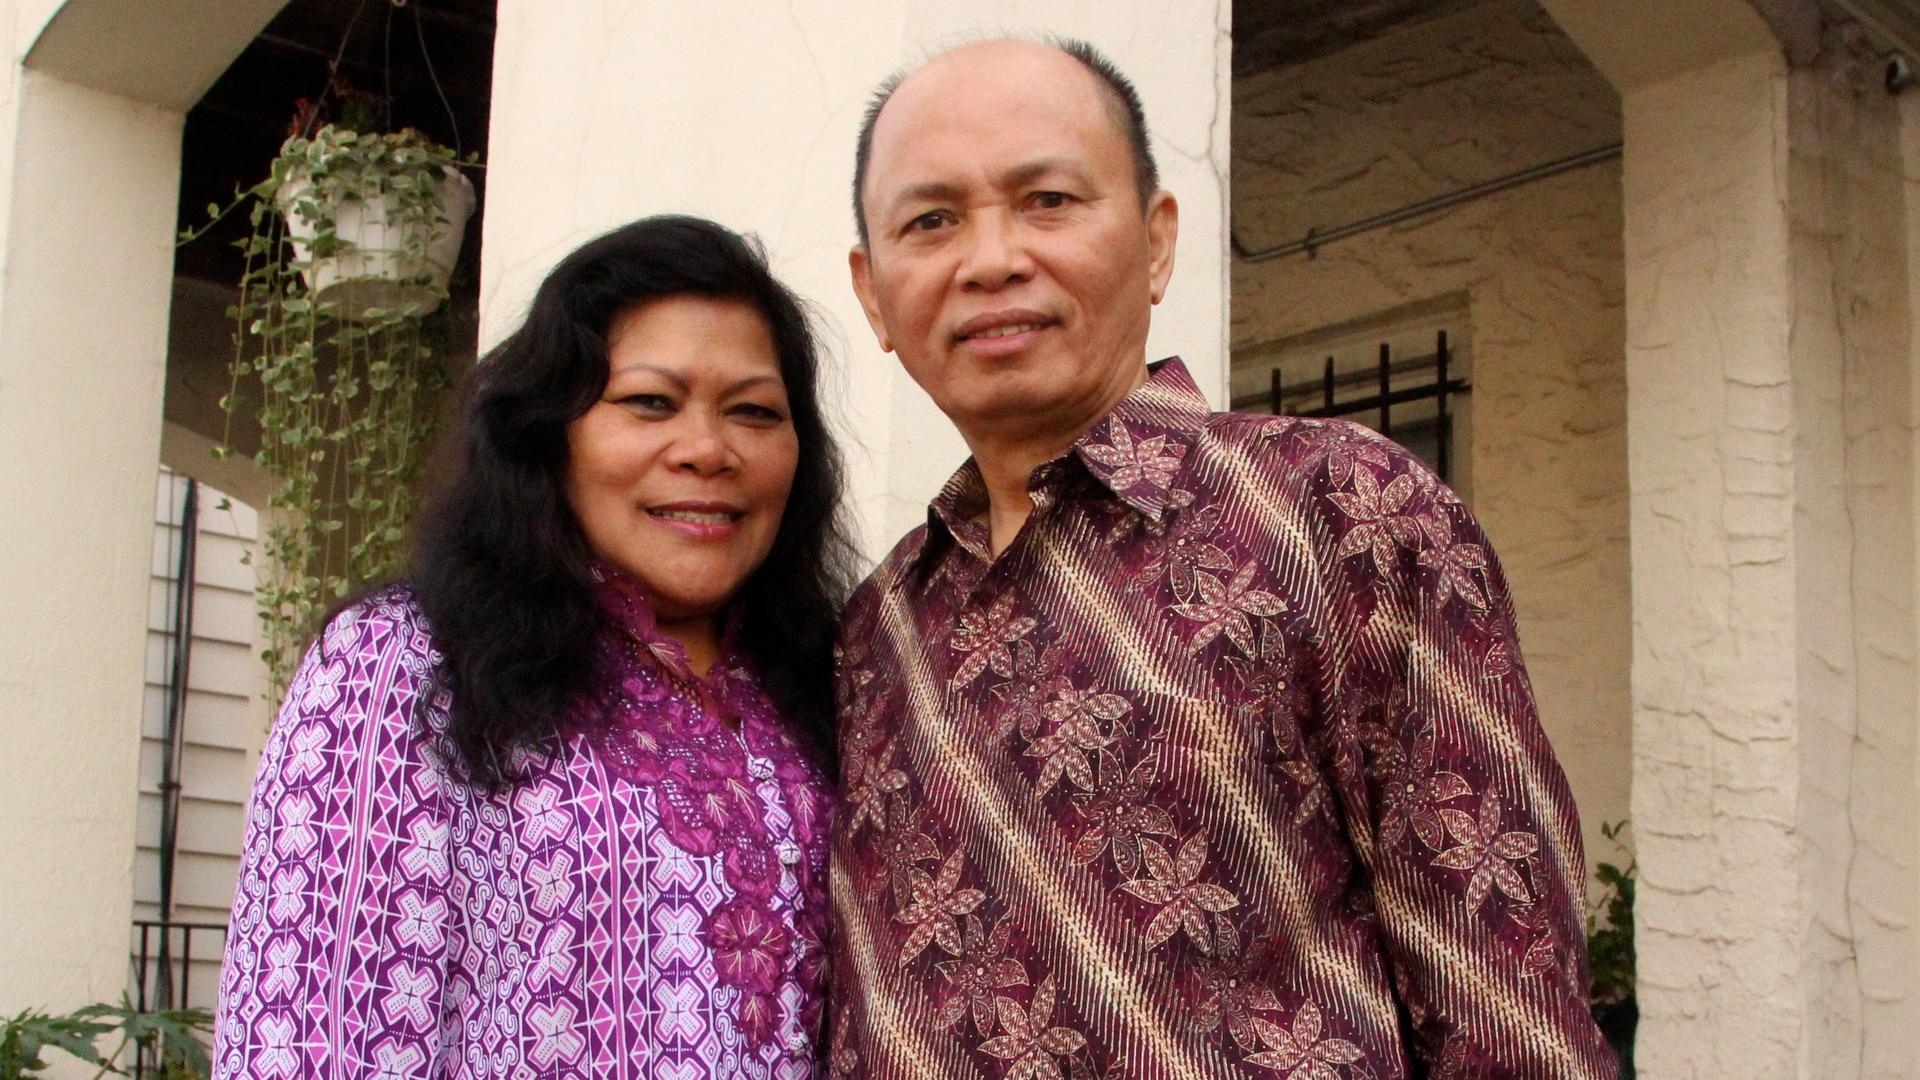 Rose and Alfrits Monintja outside of their home in the New York City borough of Queens. The Monintjas are originally from the village of Sonder in North Sulawesi, Indonesia, and are among an estimated 100,000 people who speak the disappearing language Ton